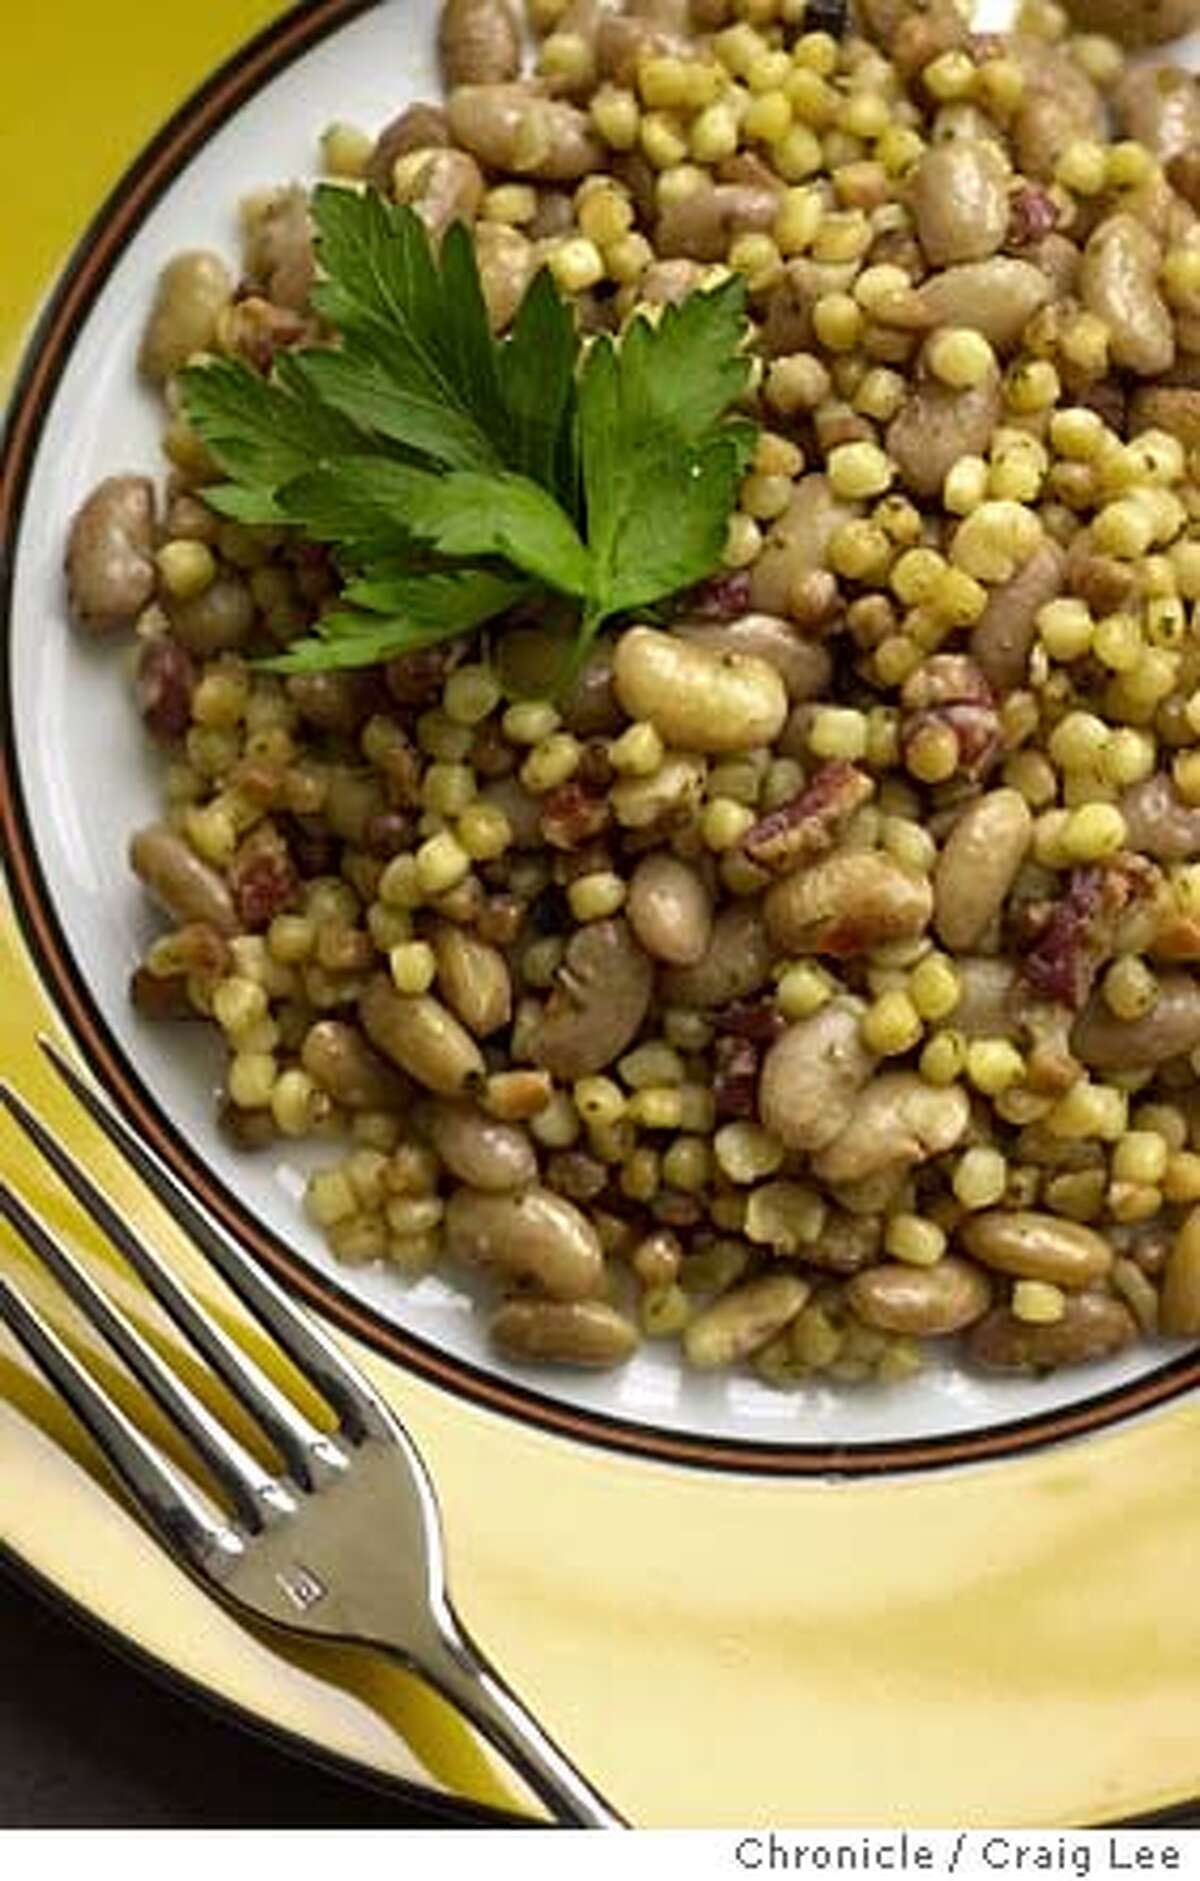 Photo of Fregola with Cranberry Beans. Food photo styled by Noel Advincula. Event on 12/23/03 in San Francisco. CRAIG LEE / The Chronicle